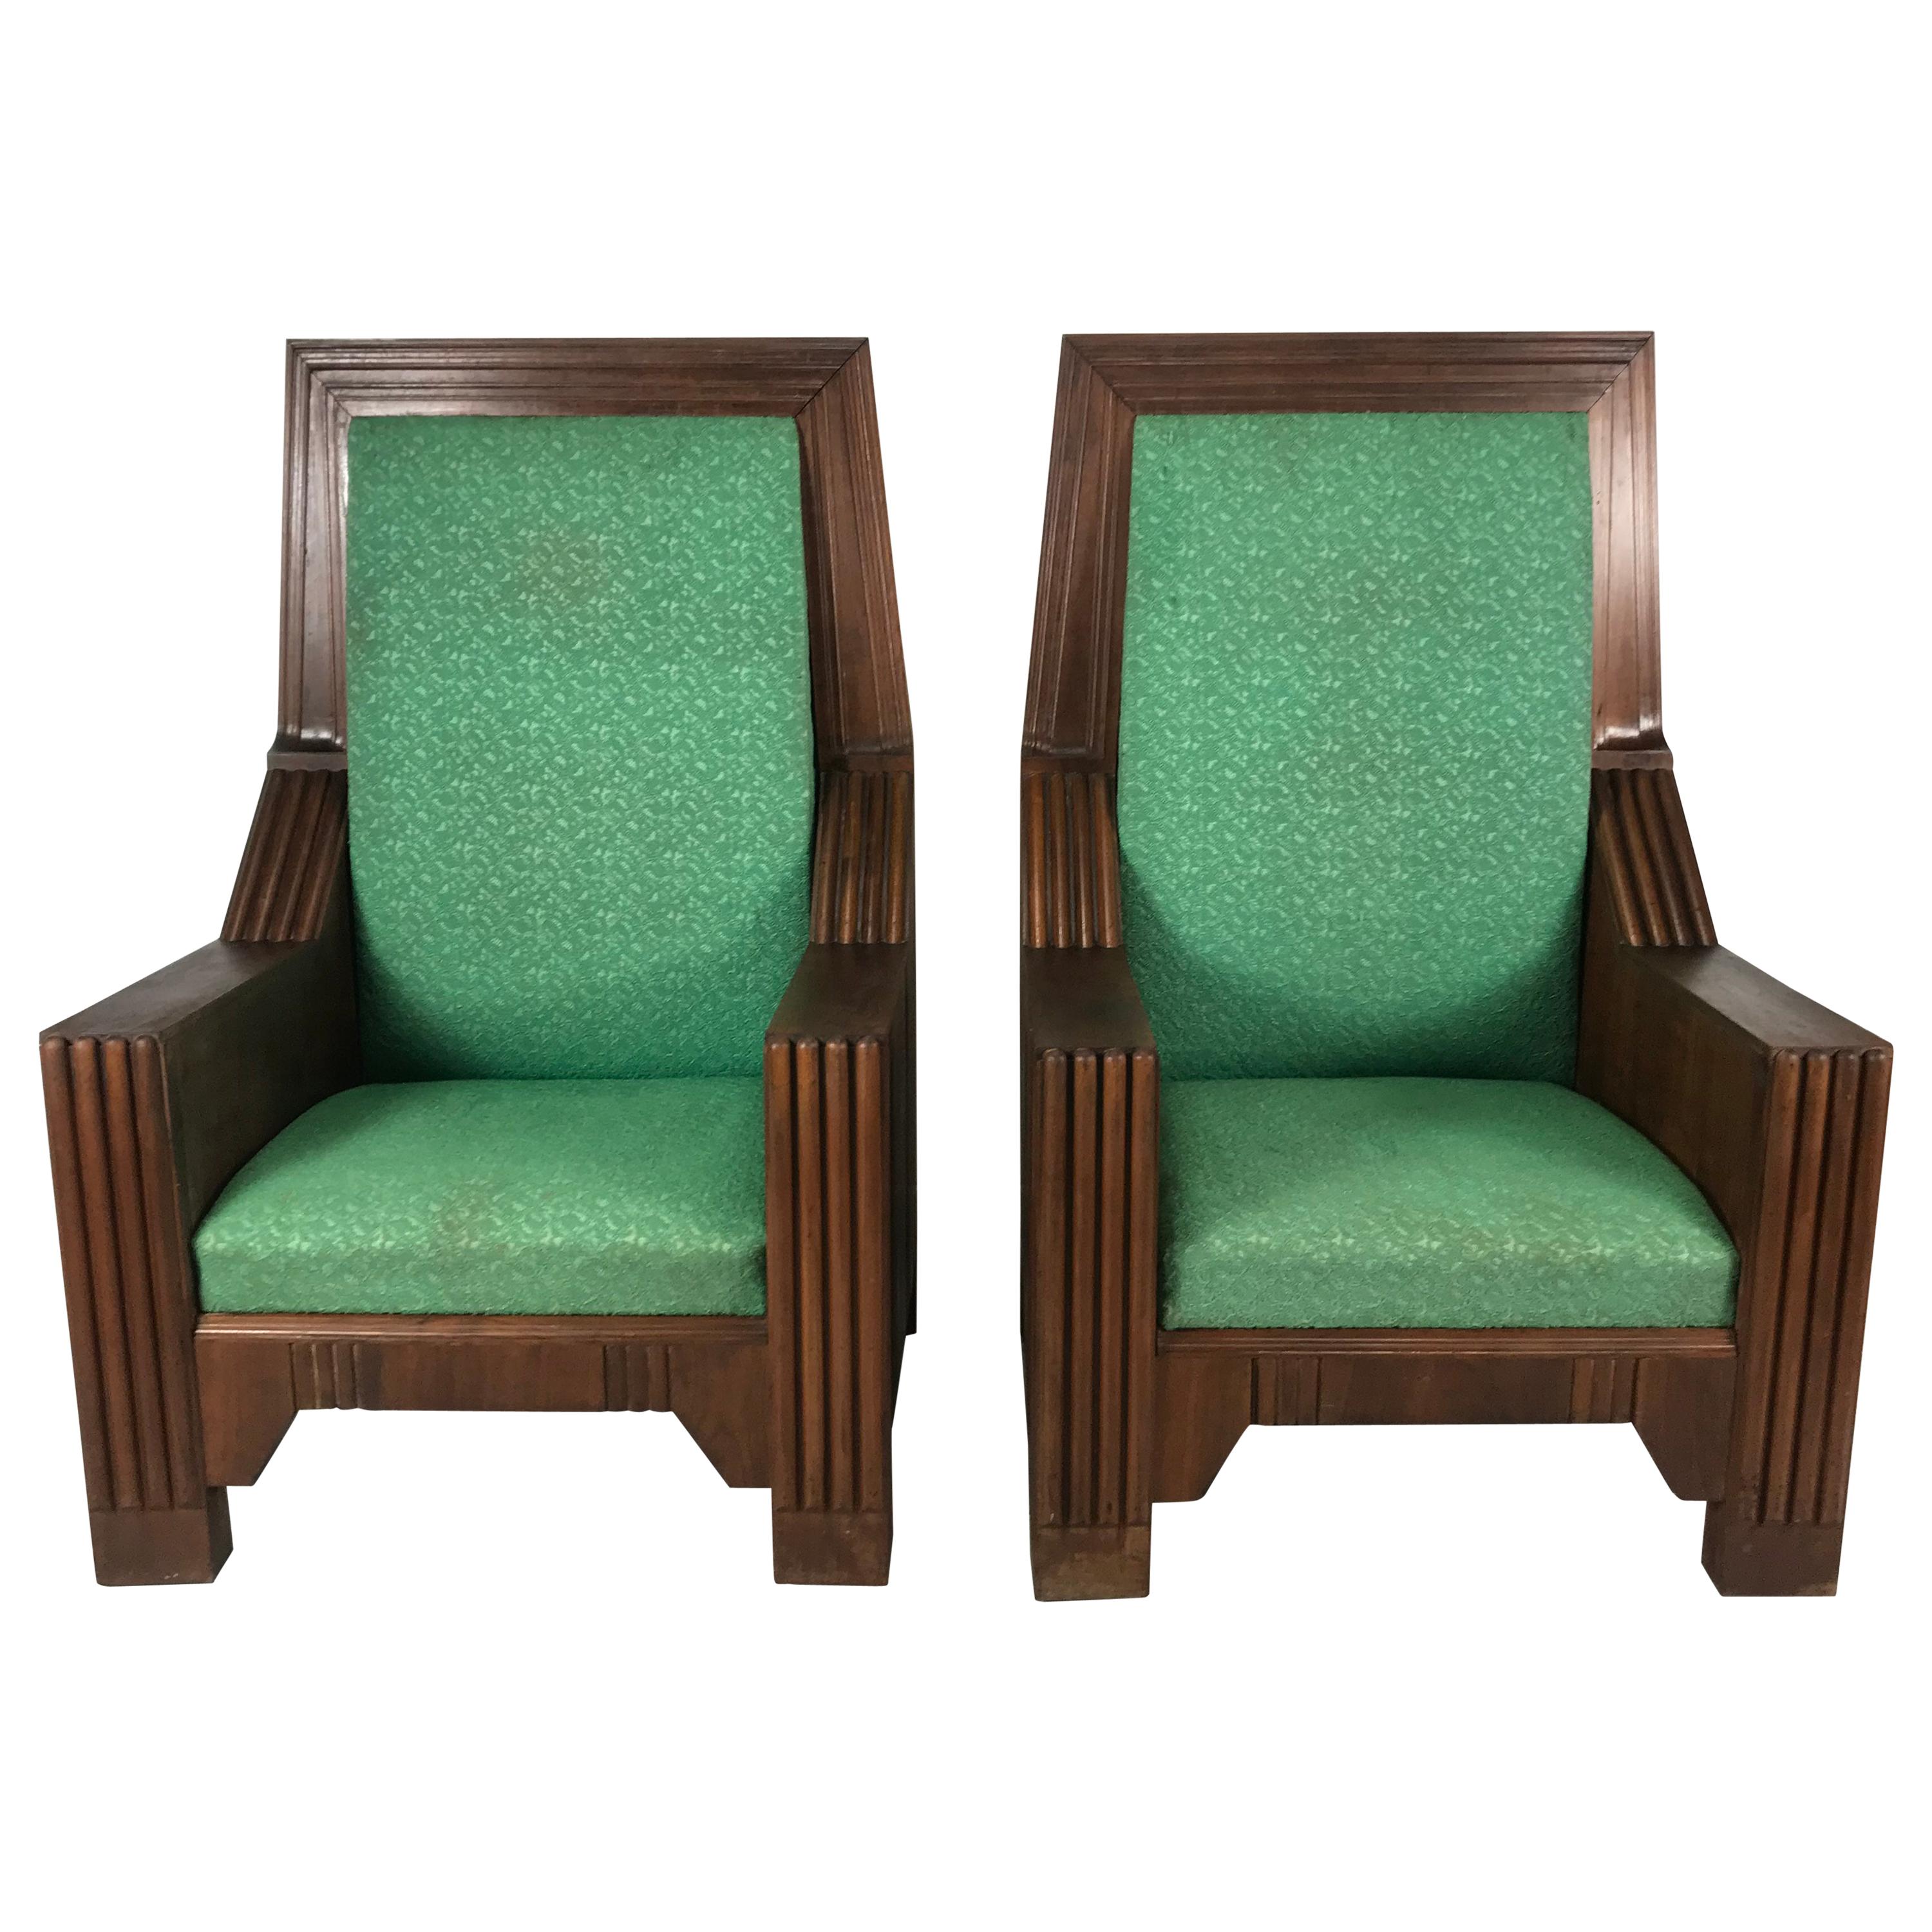 Monumental Art Deco Throne Chairs, Manufactured by the Henderson Ames Co.